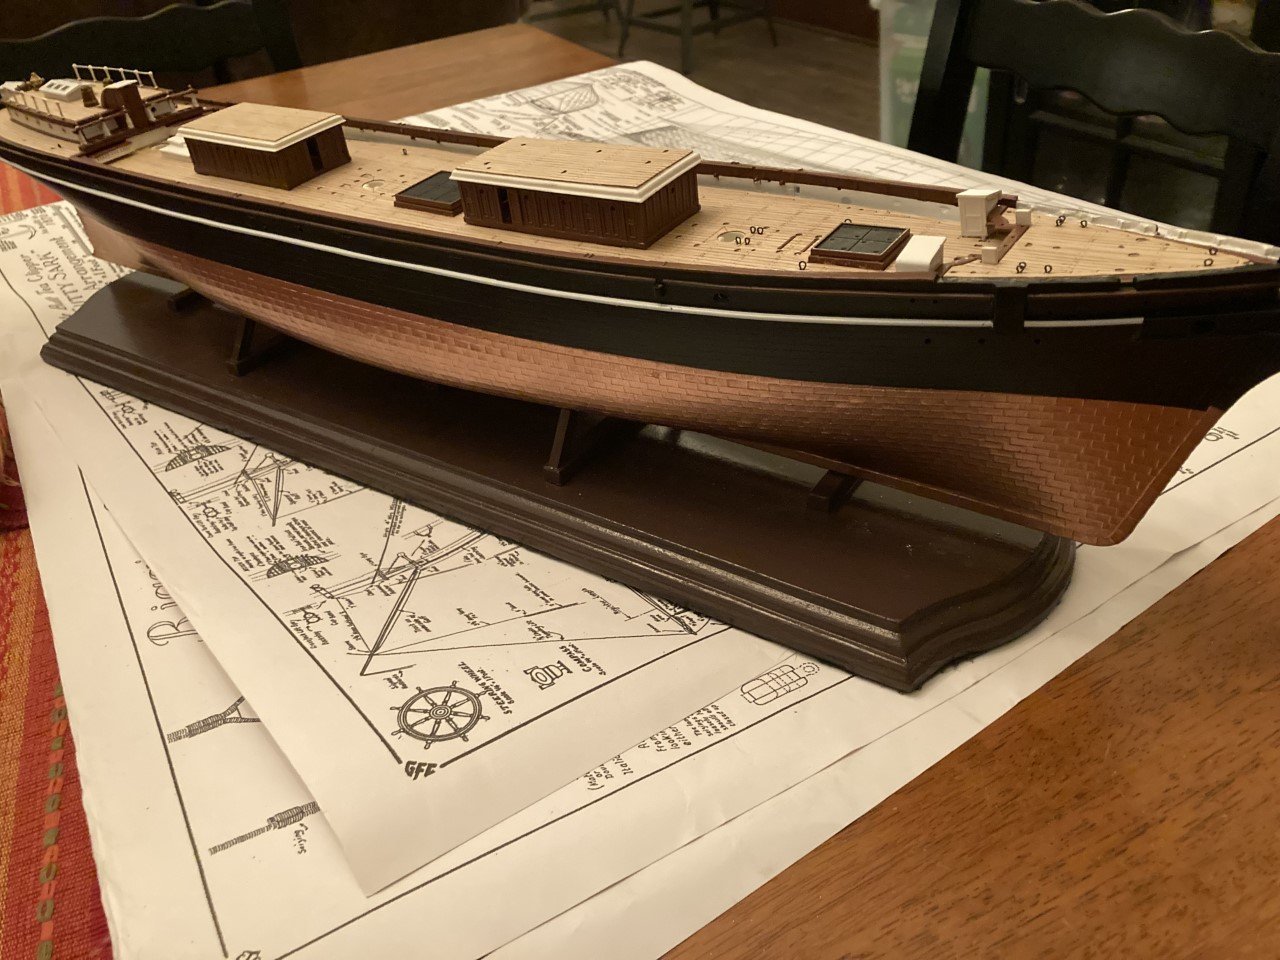 Cutty Sark by bcochran - Revell - 1/96 - - Kit build logs for